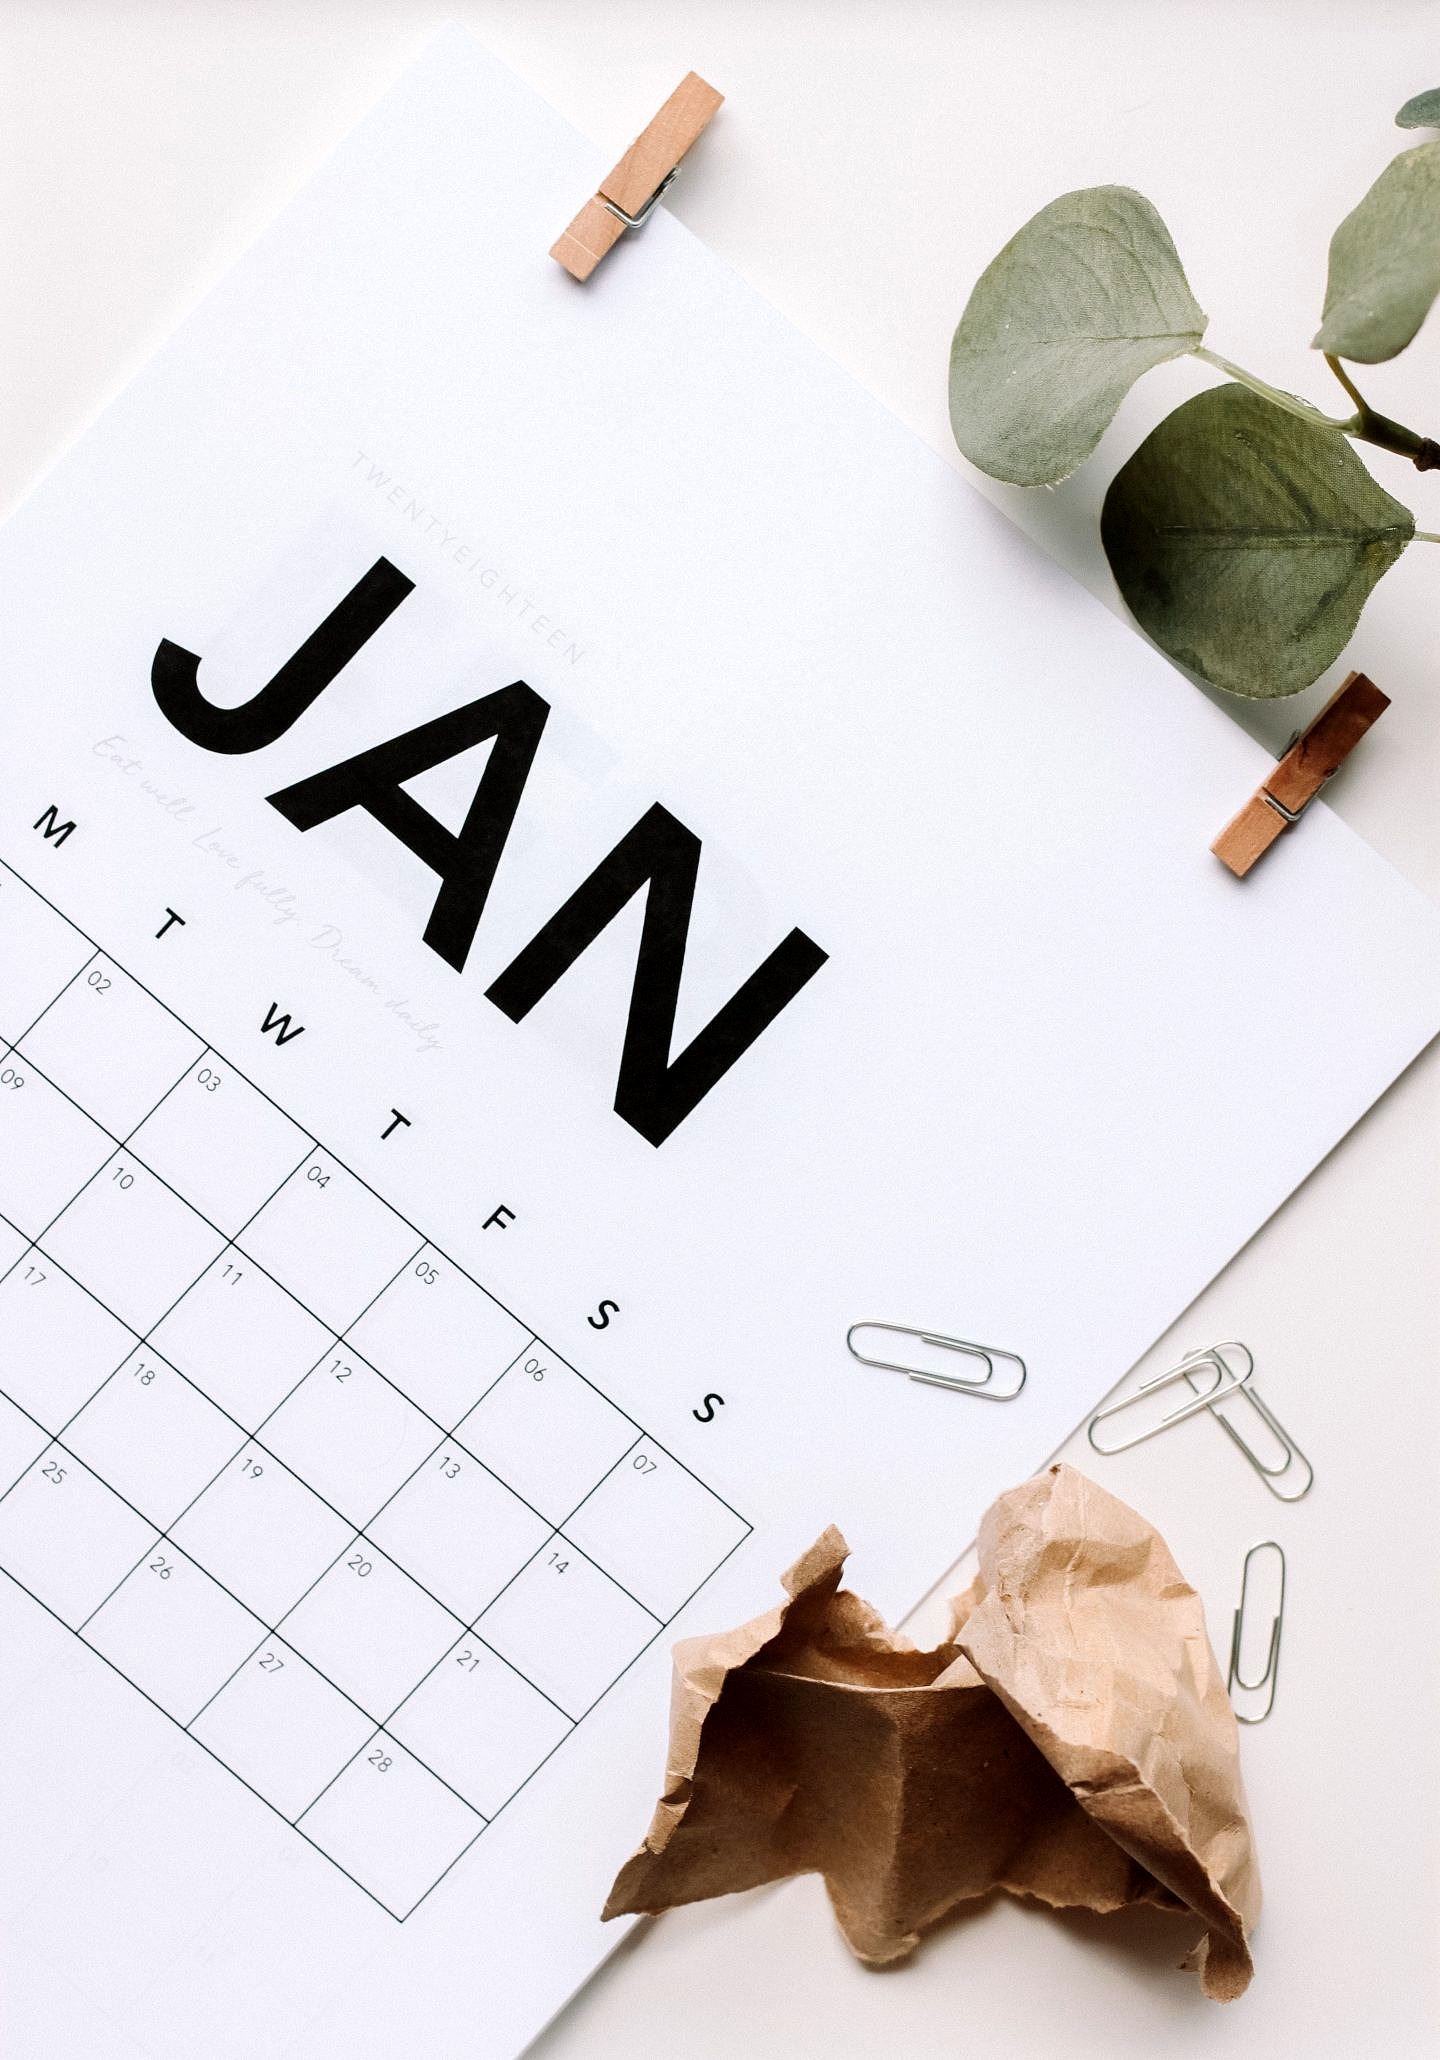 A New Year calls for New goals, right? Orange County Blogger Debbie Savage is sharing her top 5 New Year's resolutions + a great giveaway.  Click to see them here!